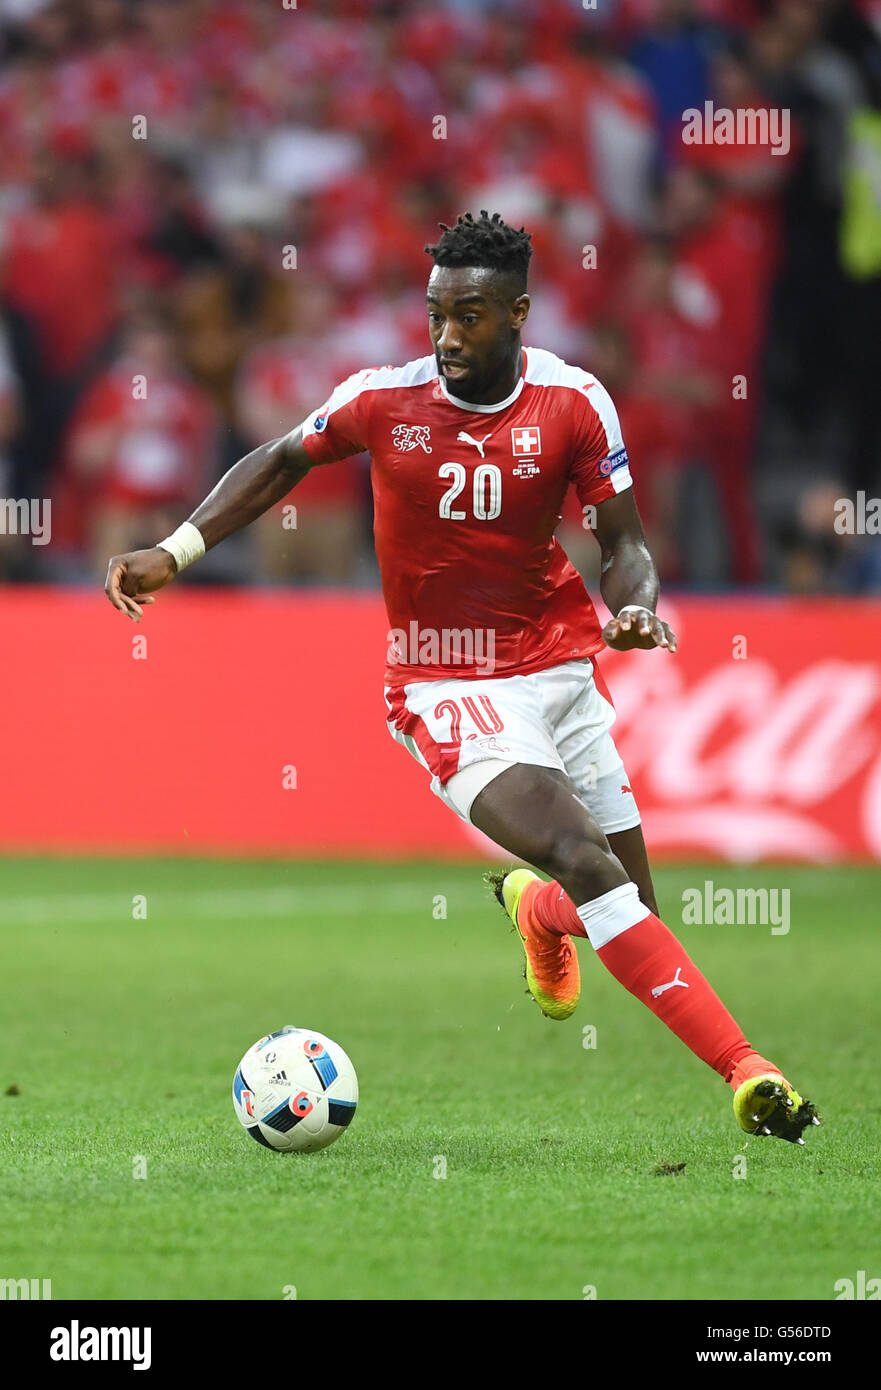 Lille, France. 19th June, 2016. Johan Djourou of Switzerland runs with the ball during the preliminary round match between Switzerland and France at Pierre Mauroy stadium in Lille, France, 19 June, 2016. Photo: Marius Becker/dpa/Alamy Live News Stock Photo